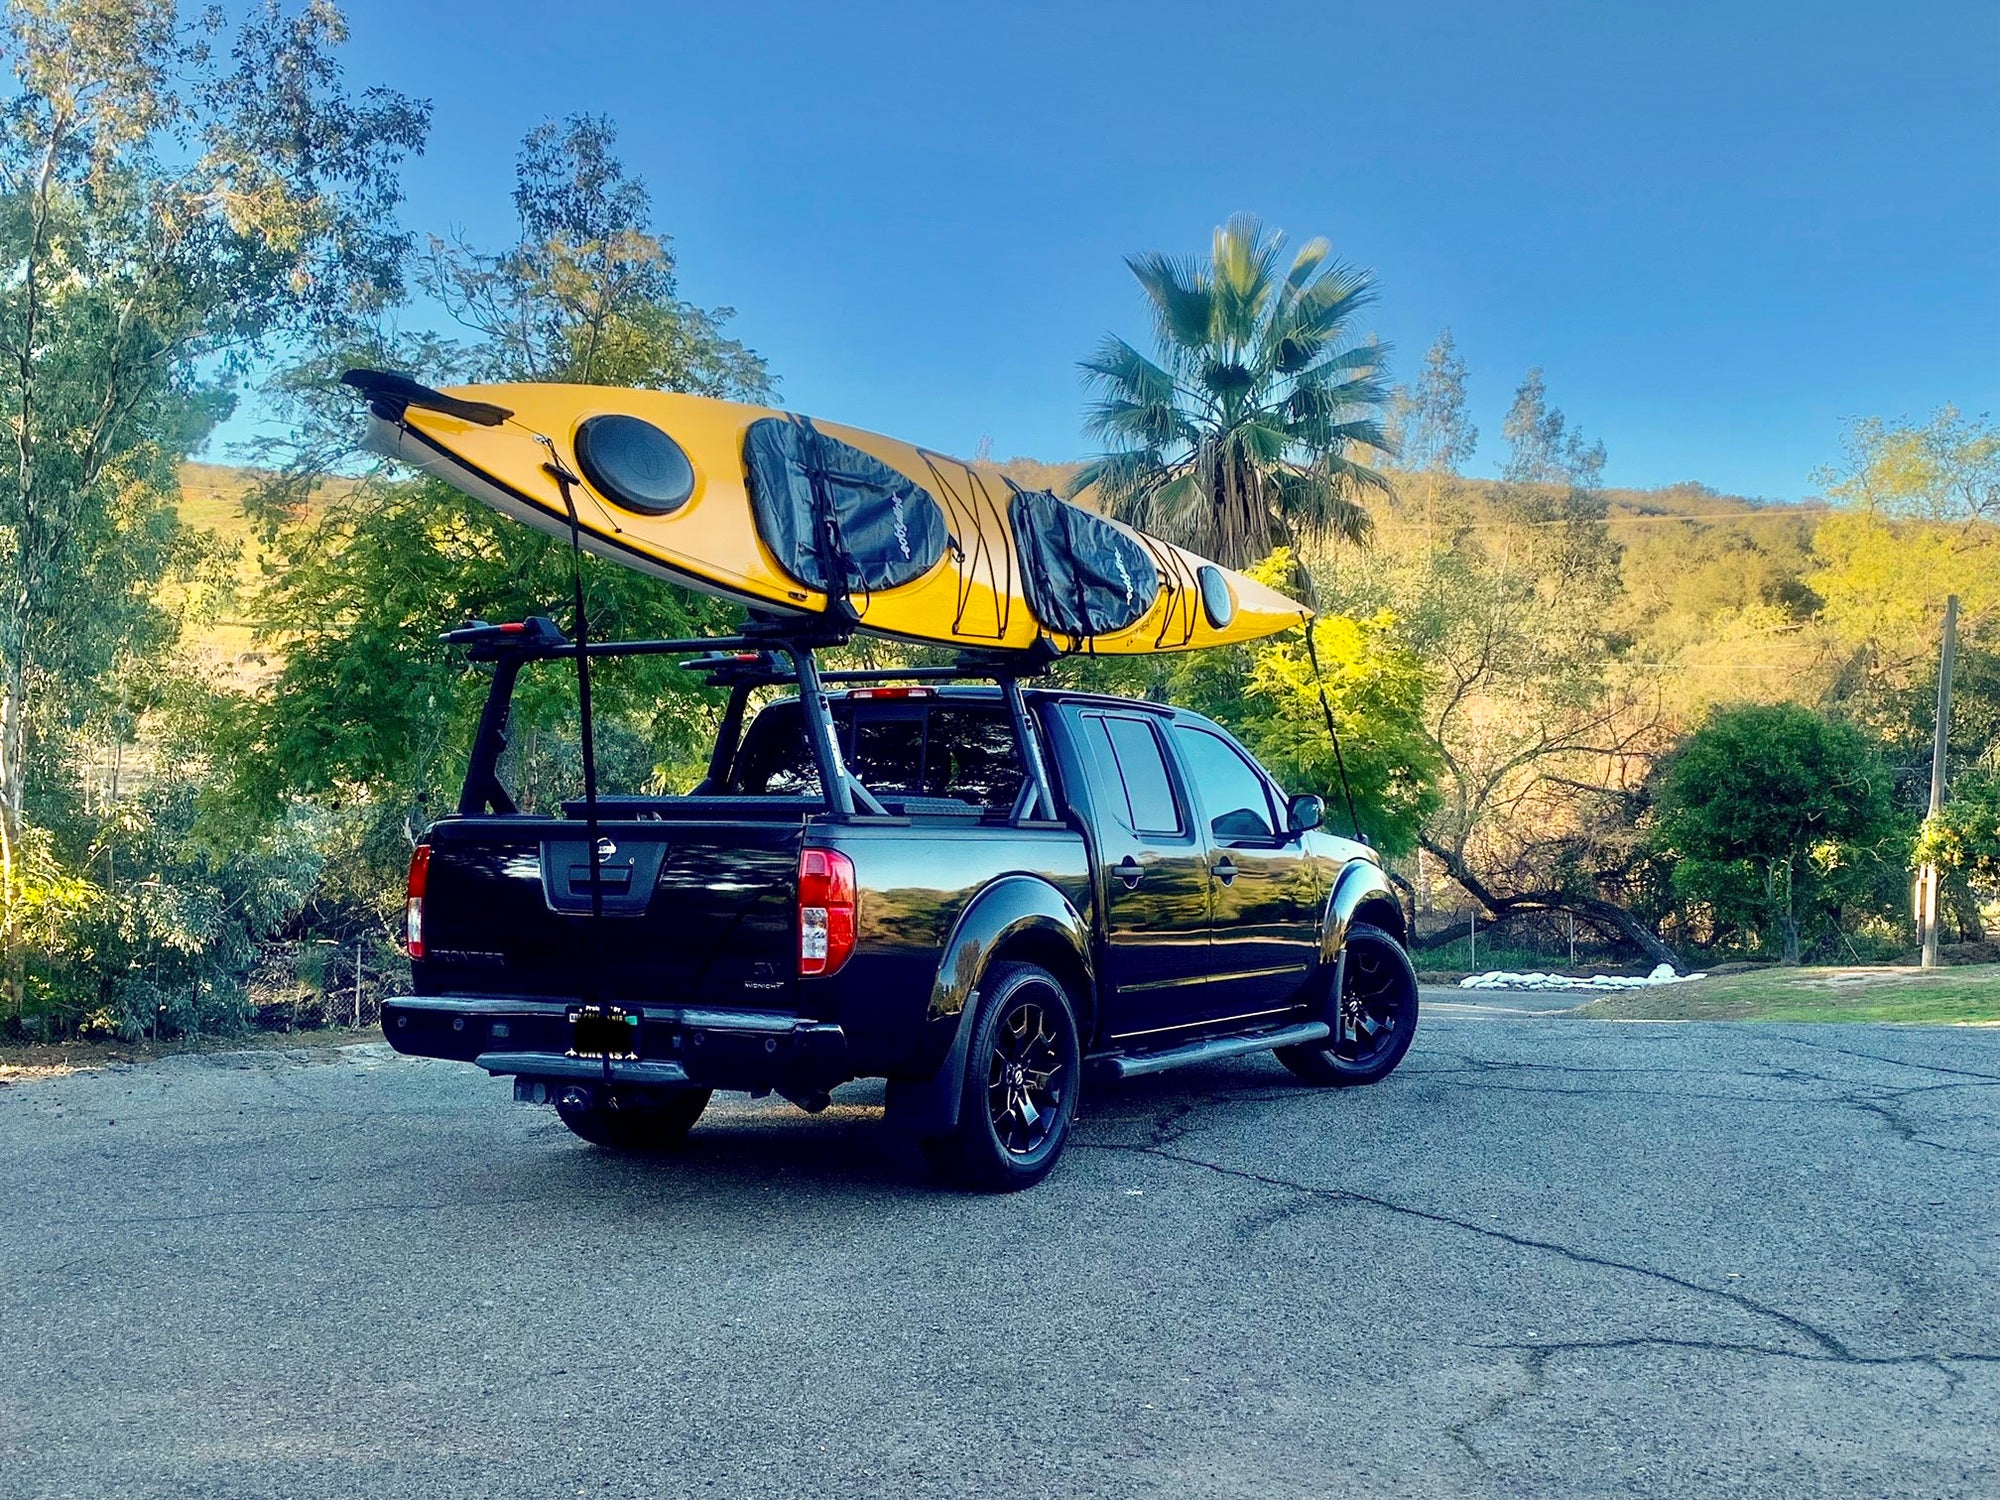 Getting There: Options for Transporting Your Kayak